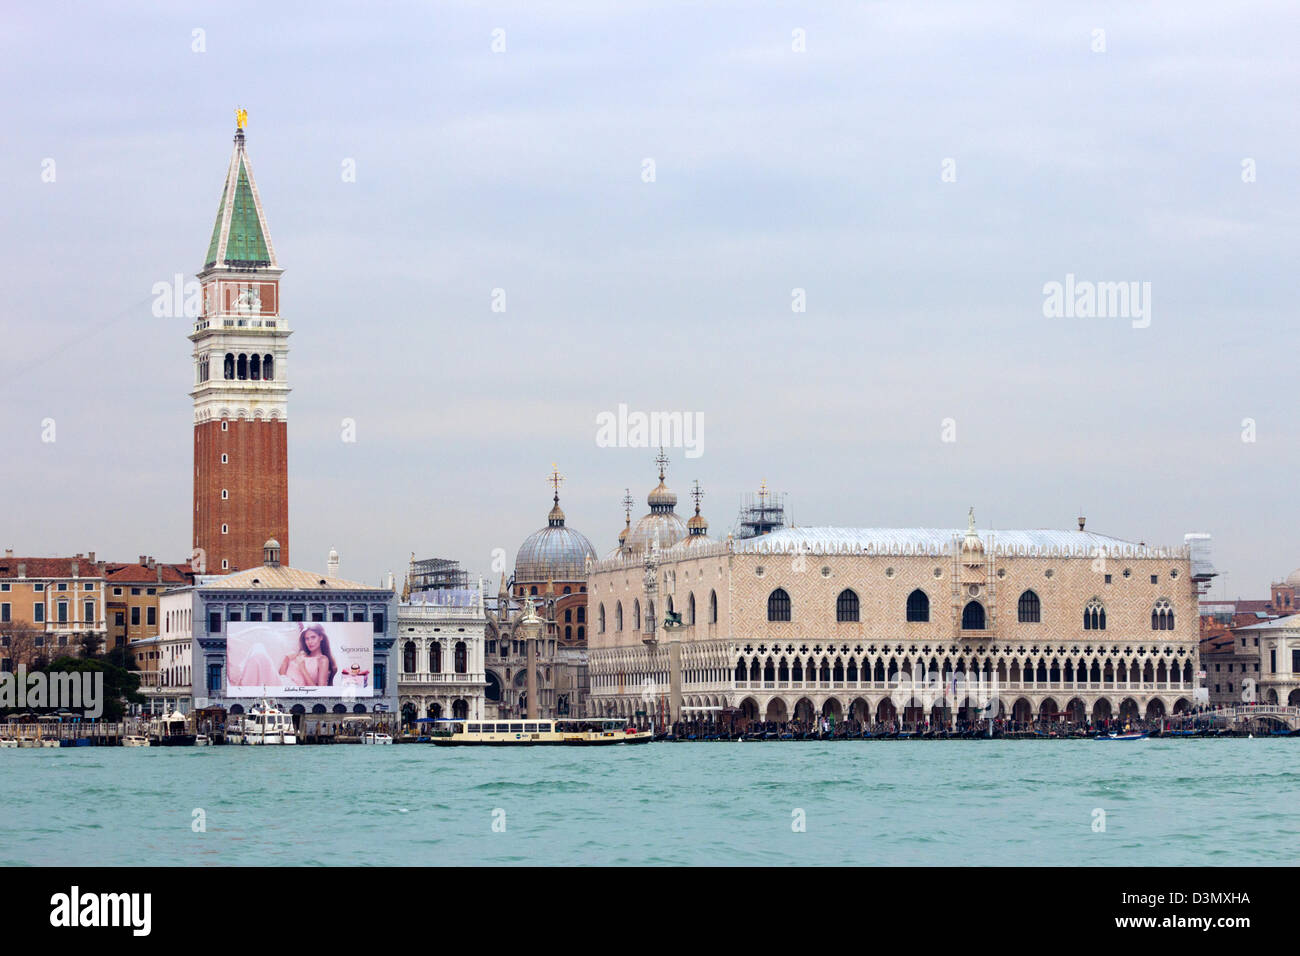 View on St Mark's Square, Doges Palace and the Campanile tower. Venice, Italy Stock Photo